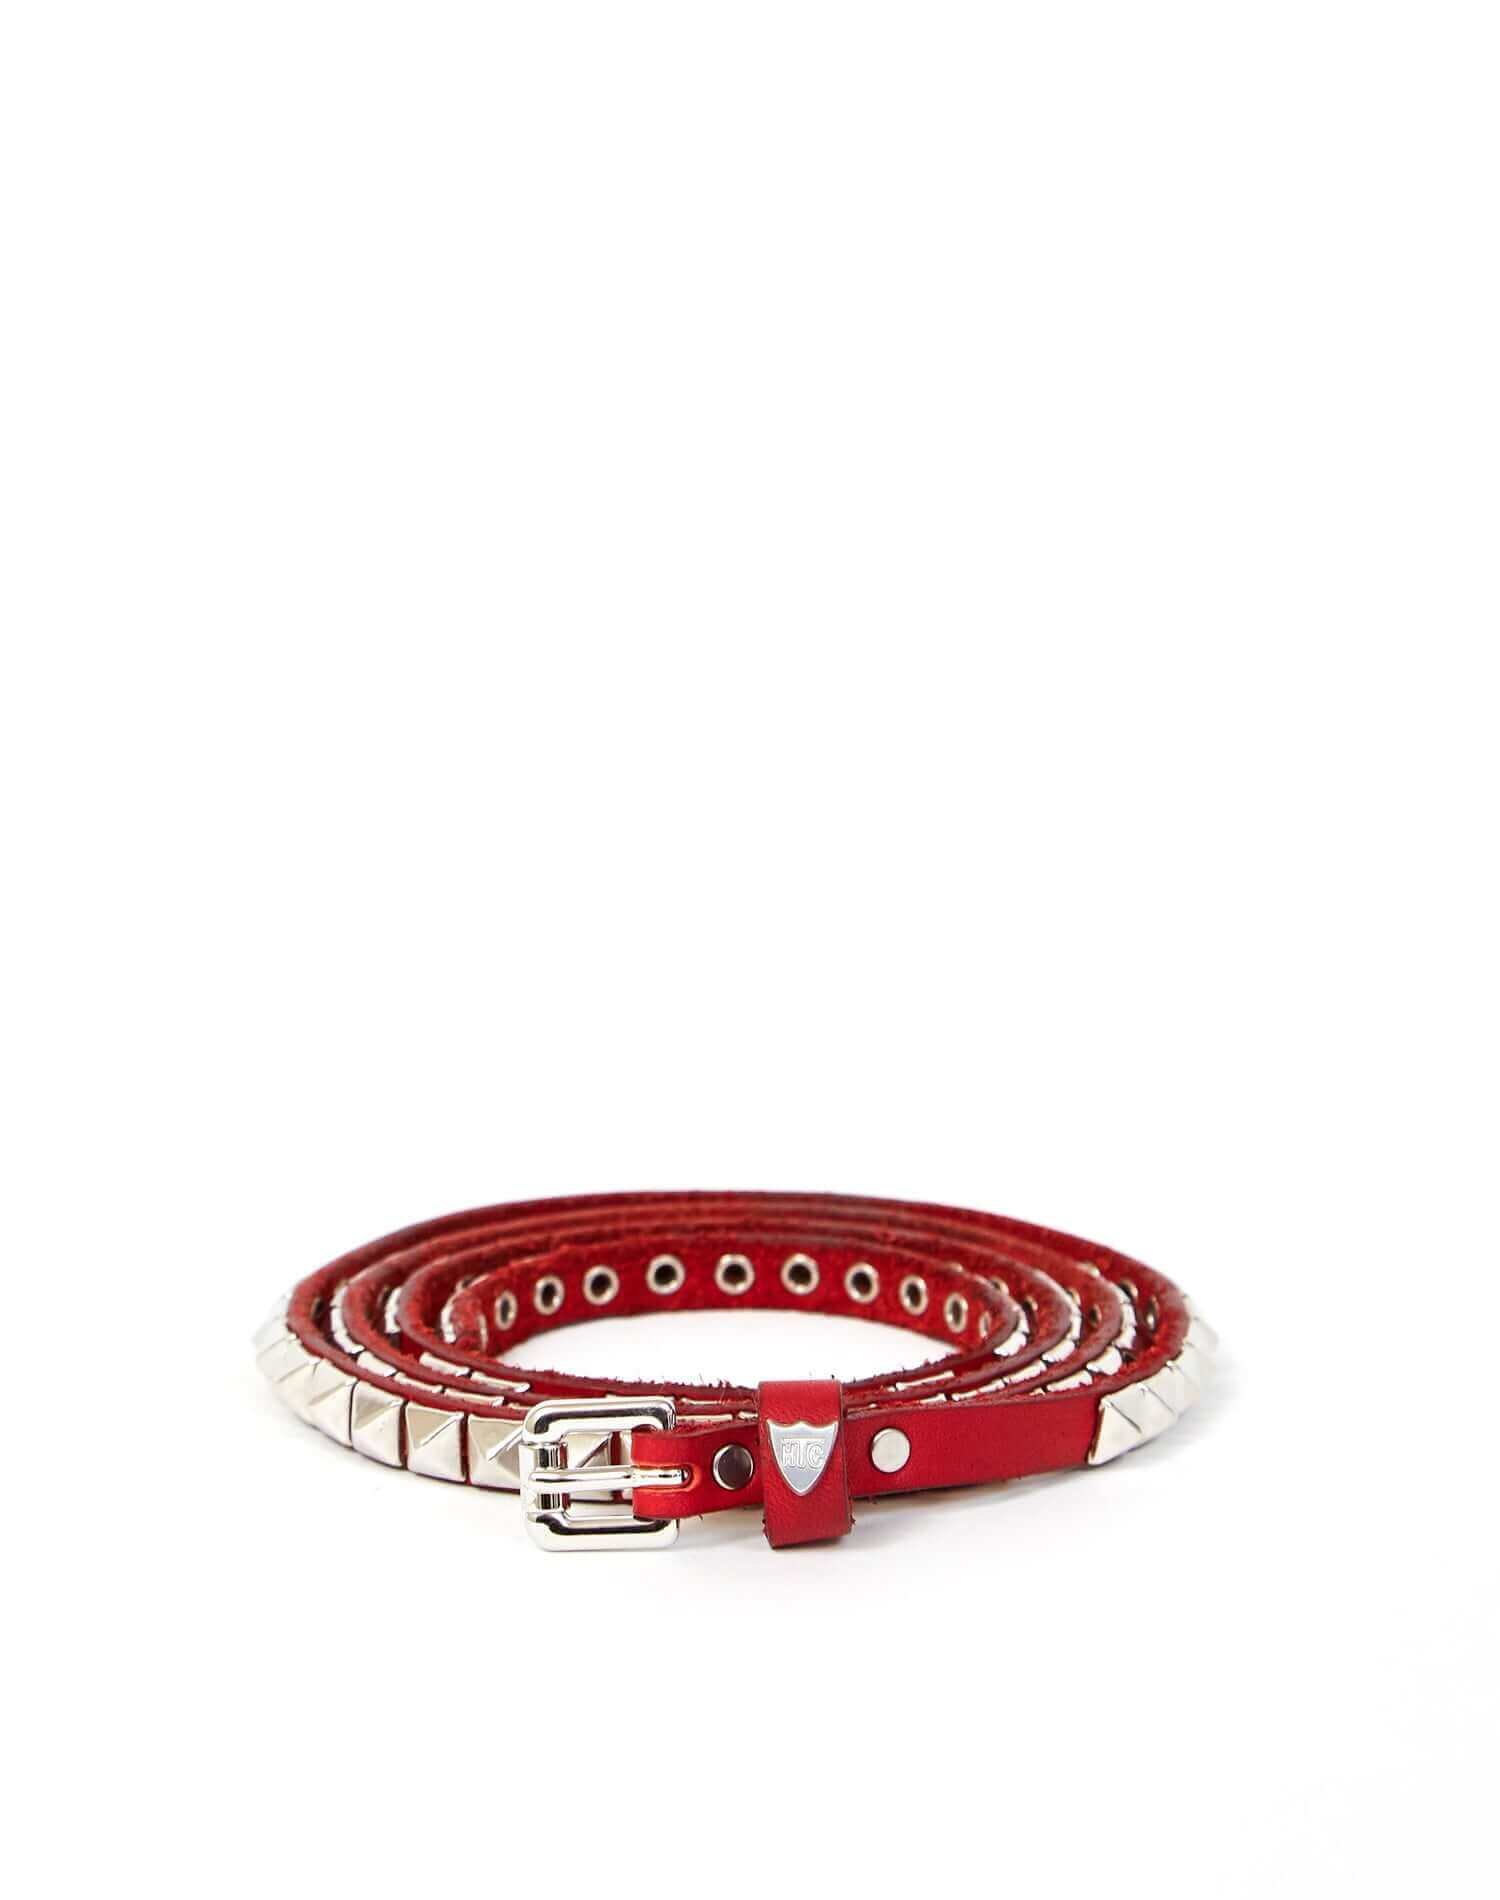 CHELSIE BELT Red leather belt with pyramidal studs, buckle and belt loop in shiny metal. Height: 1 cm. Made in Italy. HTC LOS ANGELES